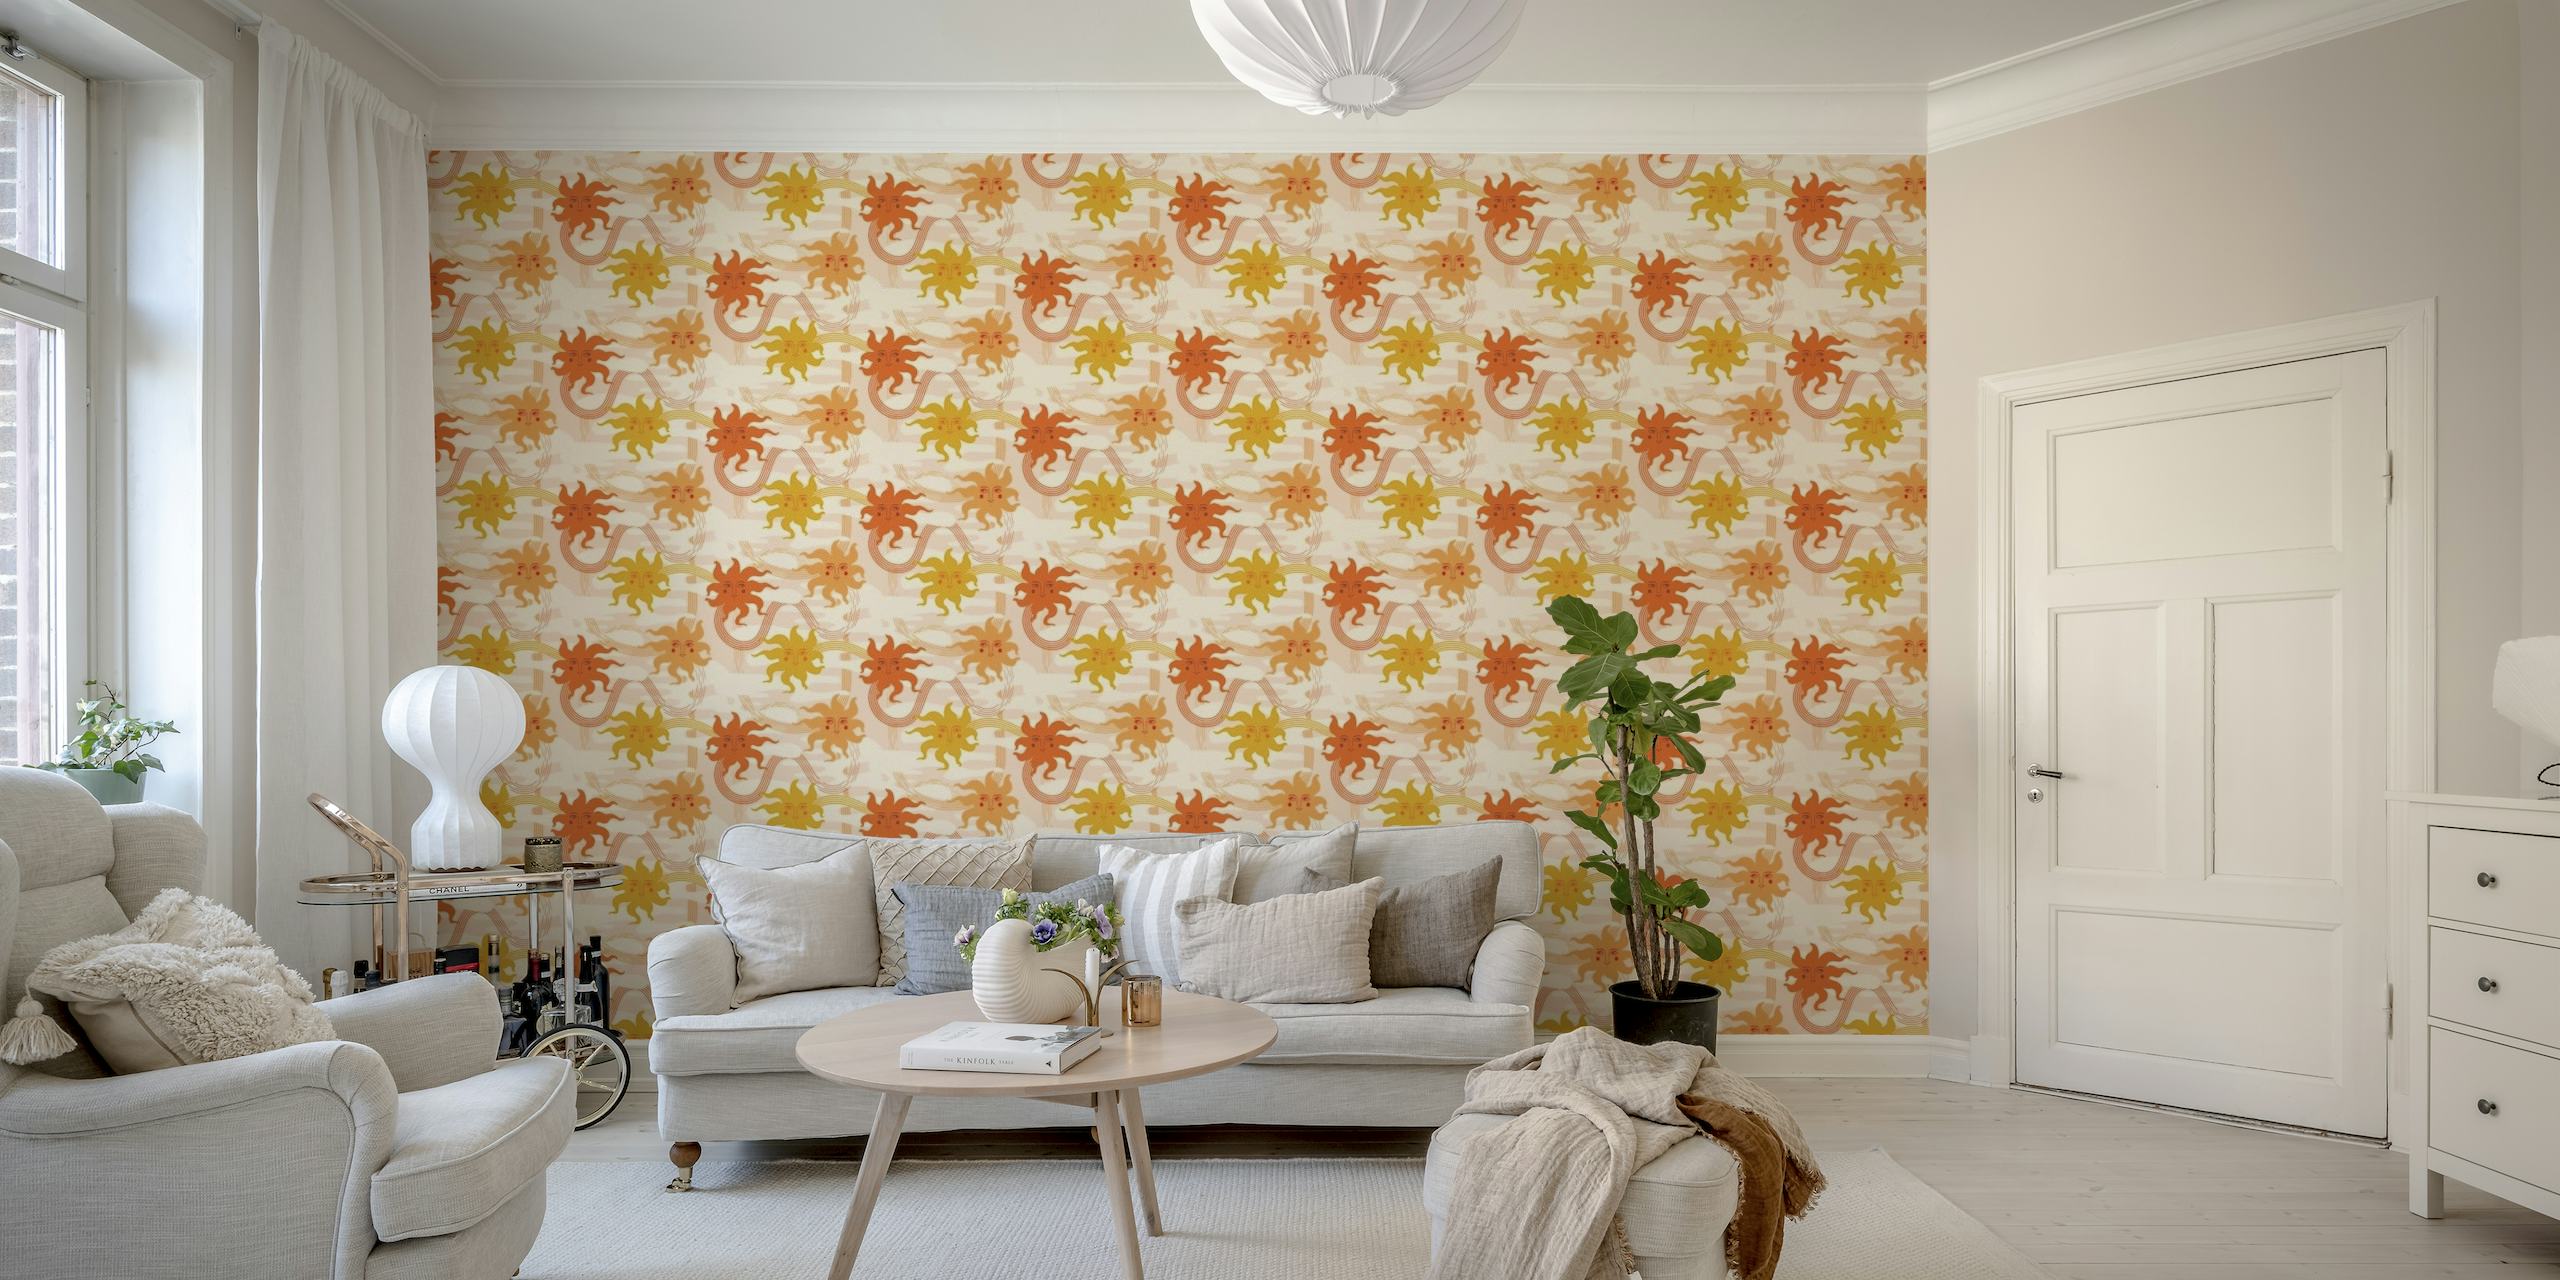 Orange and yellow floral pattern on a creamy background wall mural